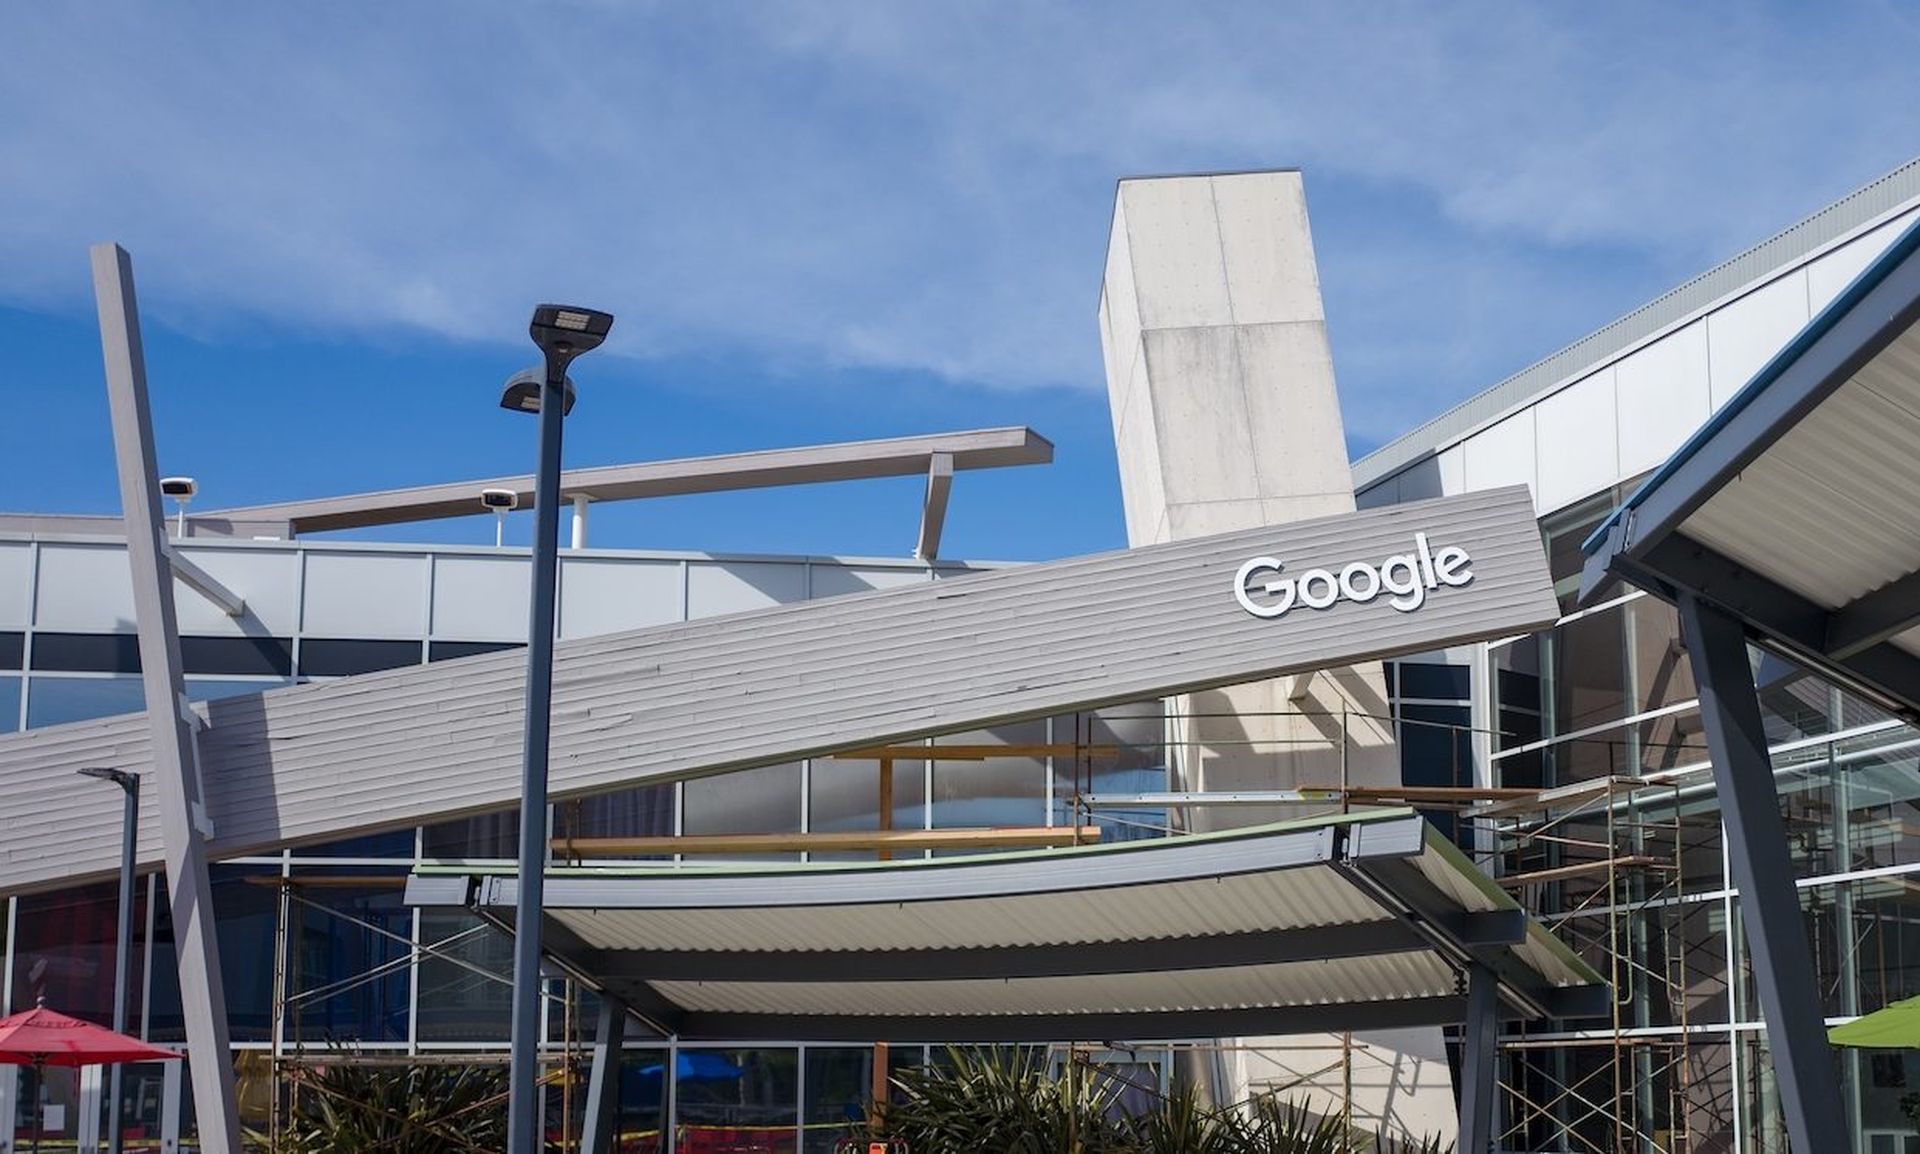 Facade with logo at the Googleplex, headquarters of Google Inc in the Silicon Valley, Mountain View, California, April 13, 2019. (Photo by Smith Collection/Gado/Getty Images)